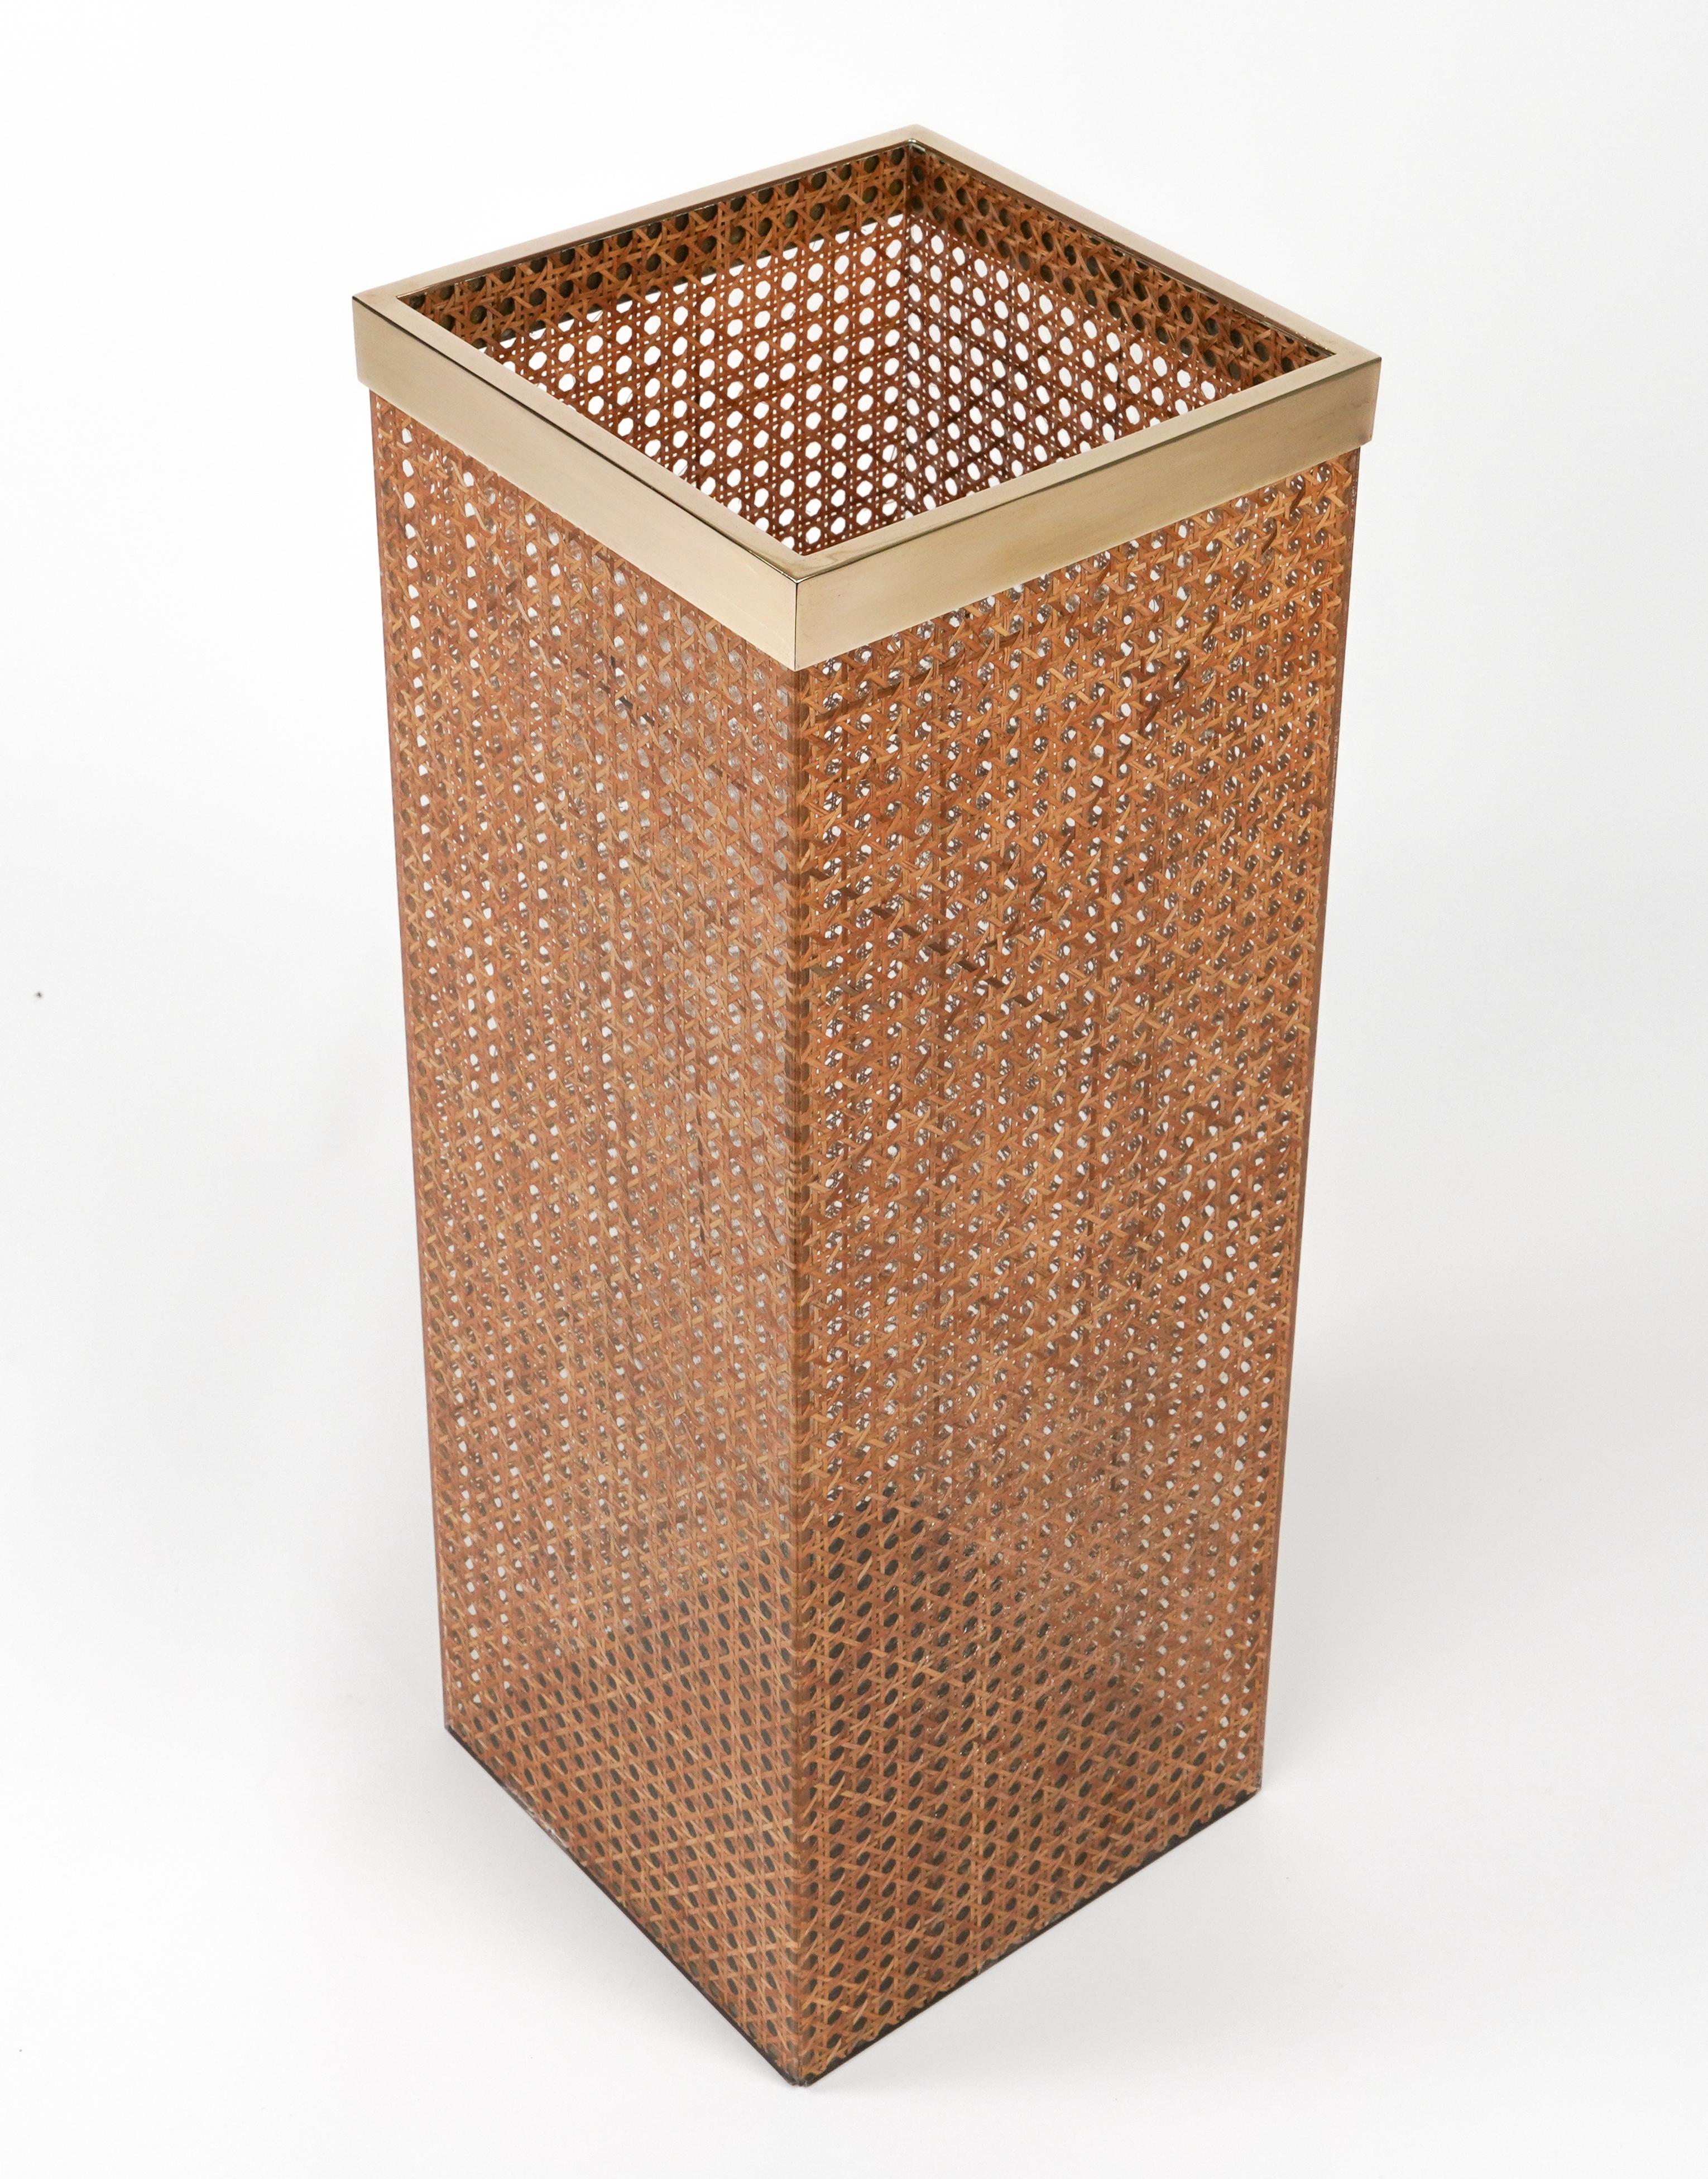 Metal Umbrella Stand in Lucite, Rattan and Brass Christian Dior Style, Italy 1970s For Sale